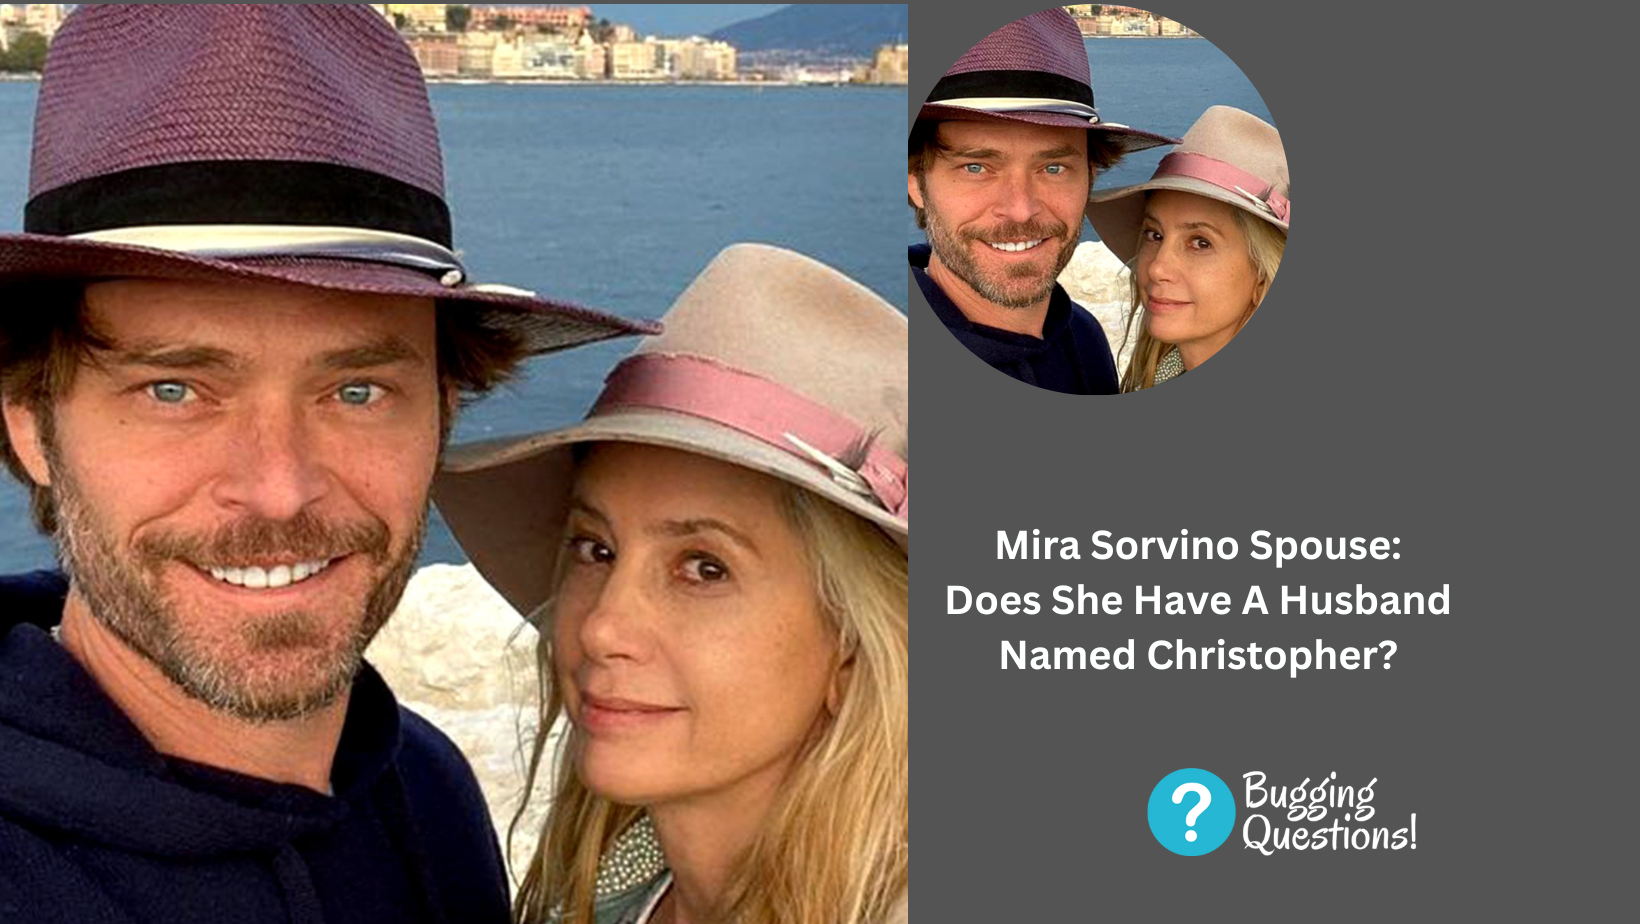 Mira Sorvino Spouse: Does She Have A Husband Named Christopher?